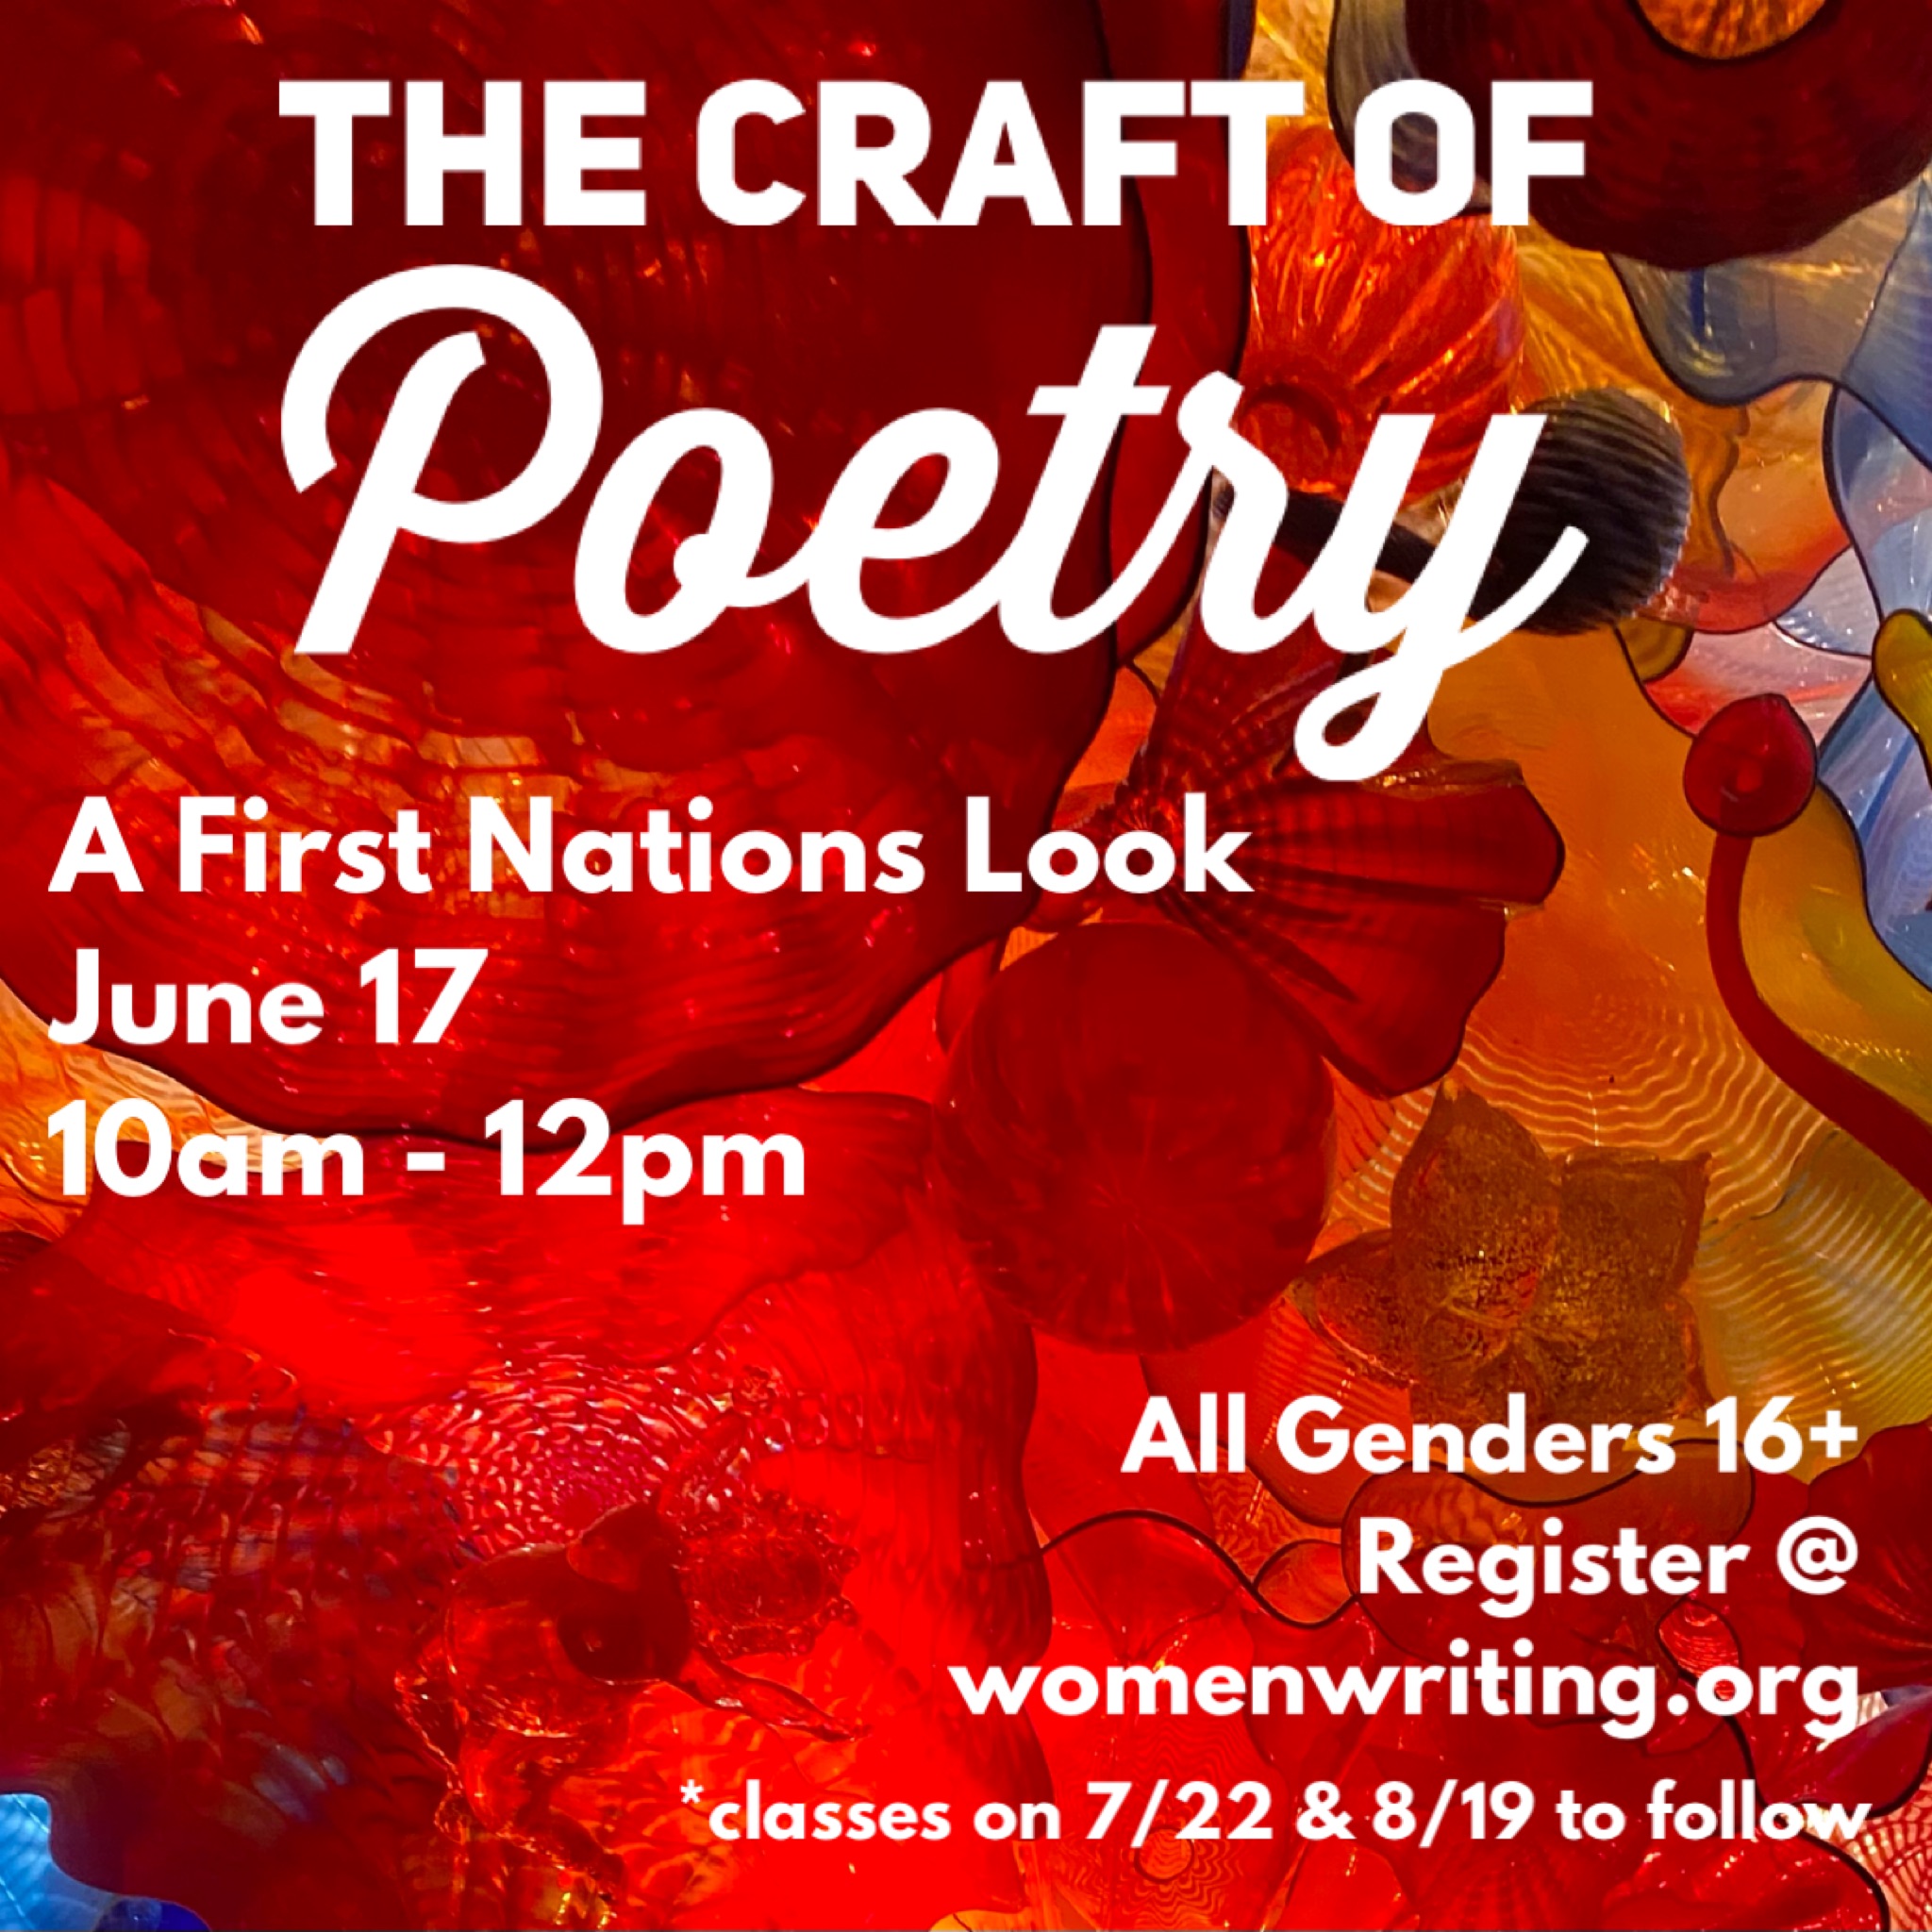 Craft of Poetry - June 17 Image